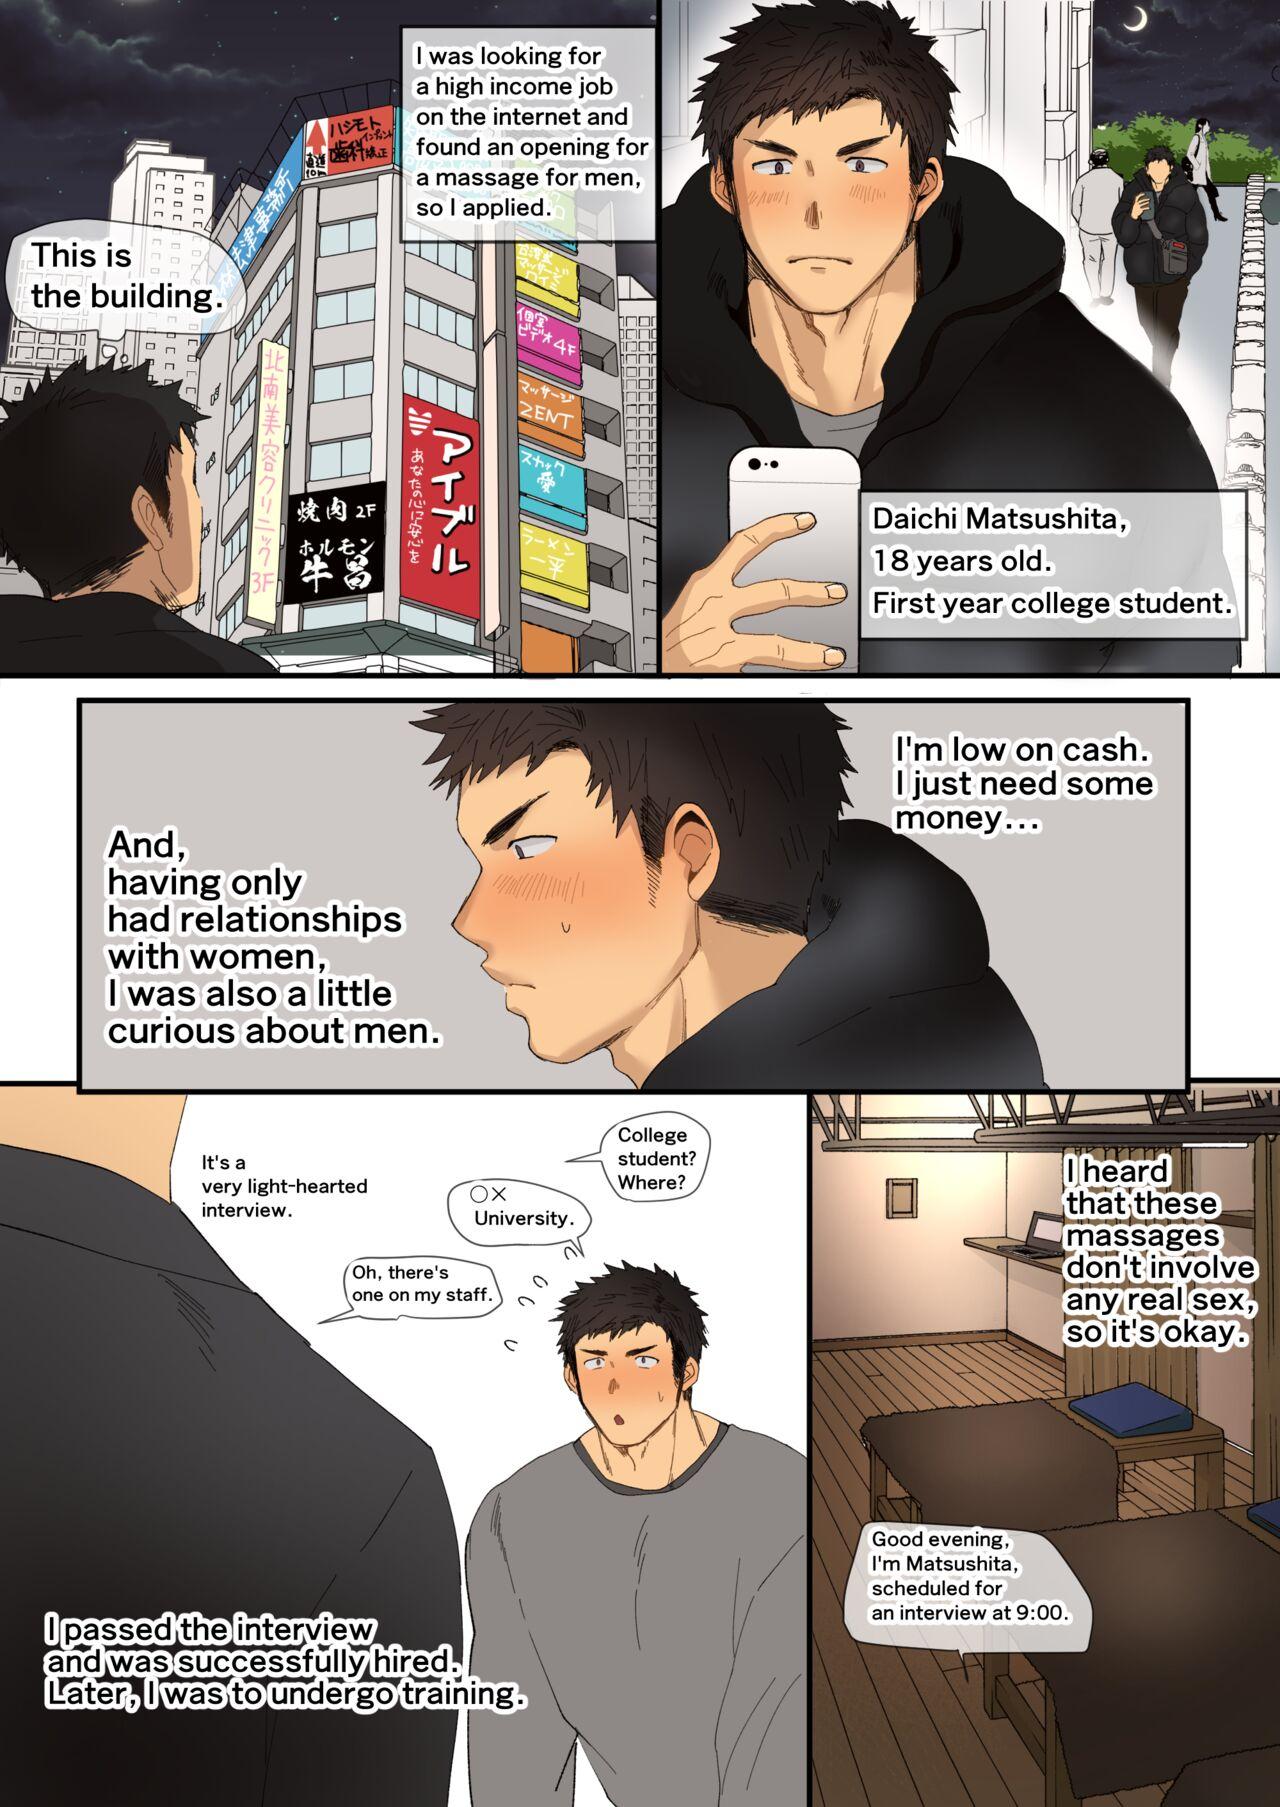 Cheat A manga about an athletic college student who receives sexually explicit massage training from an older manager - Original Brother - Picture 1